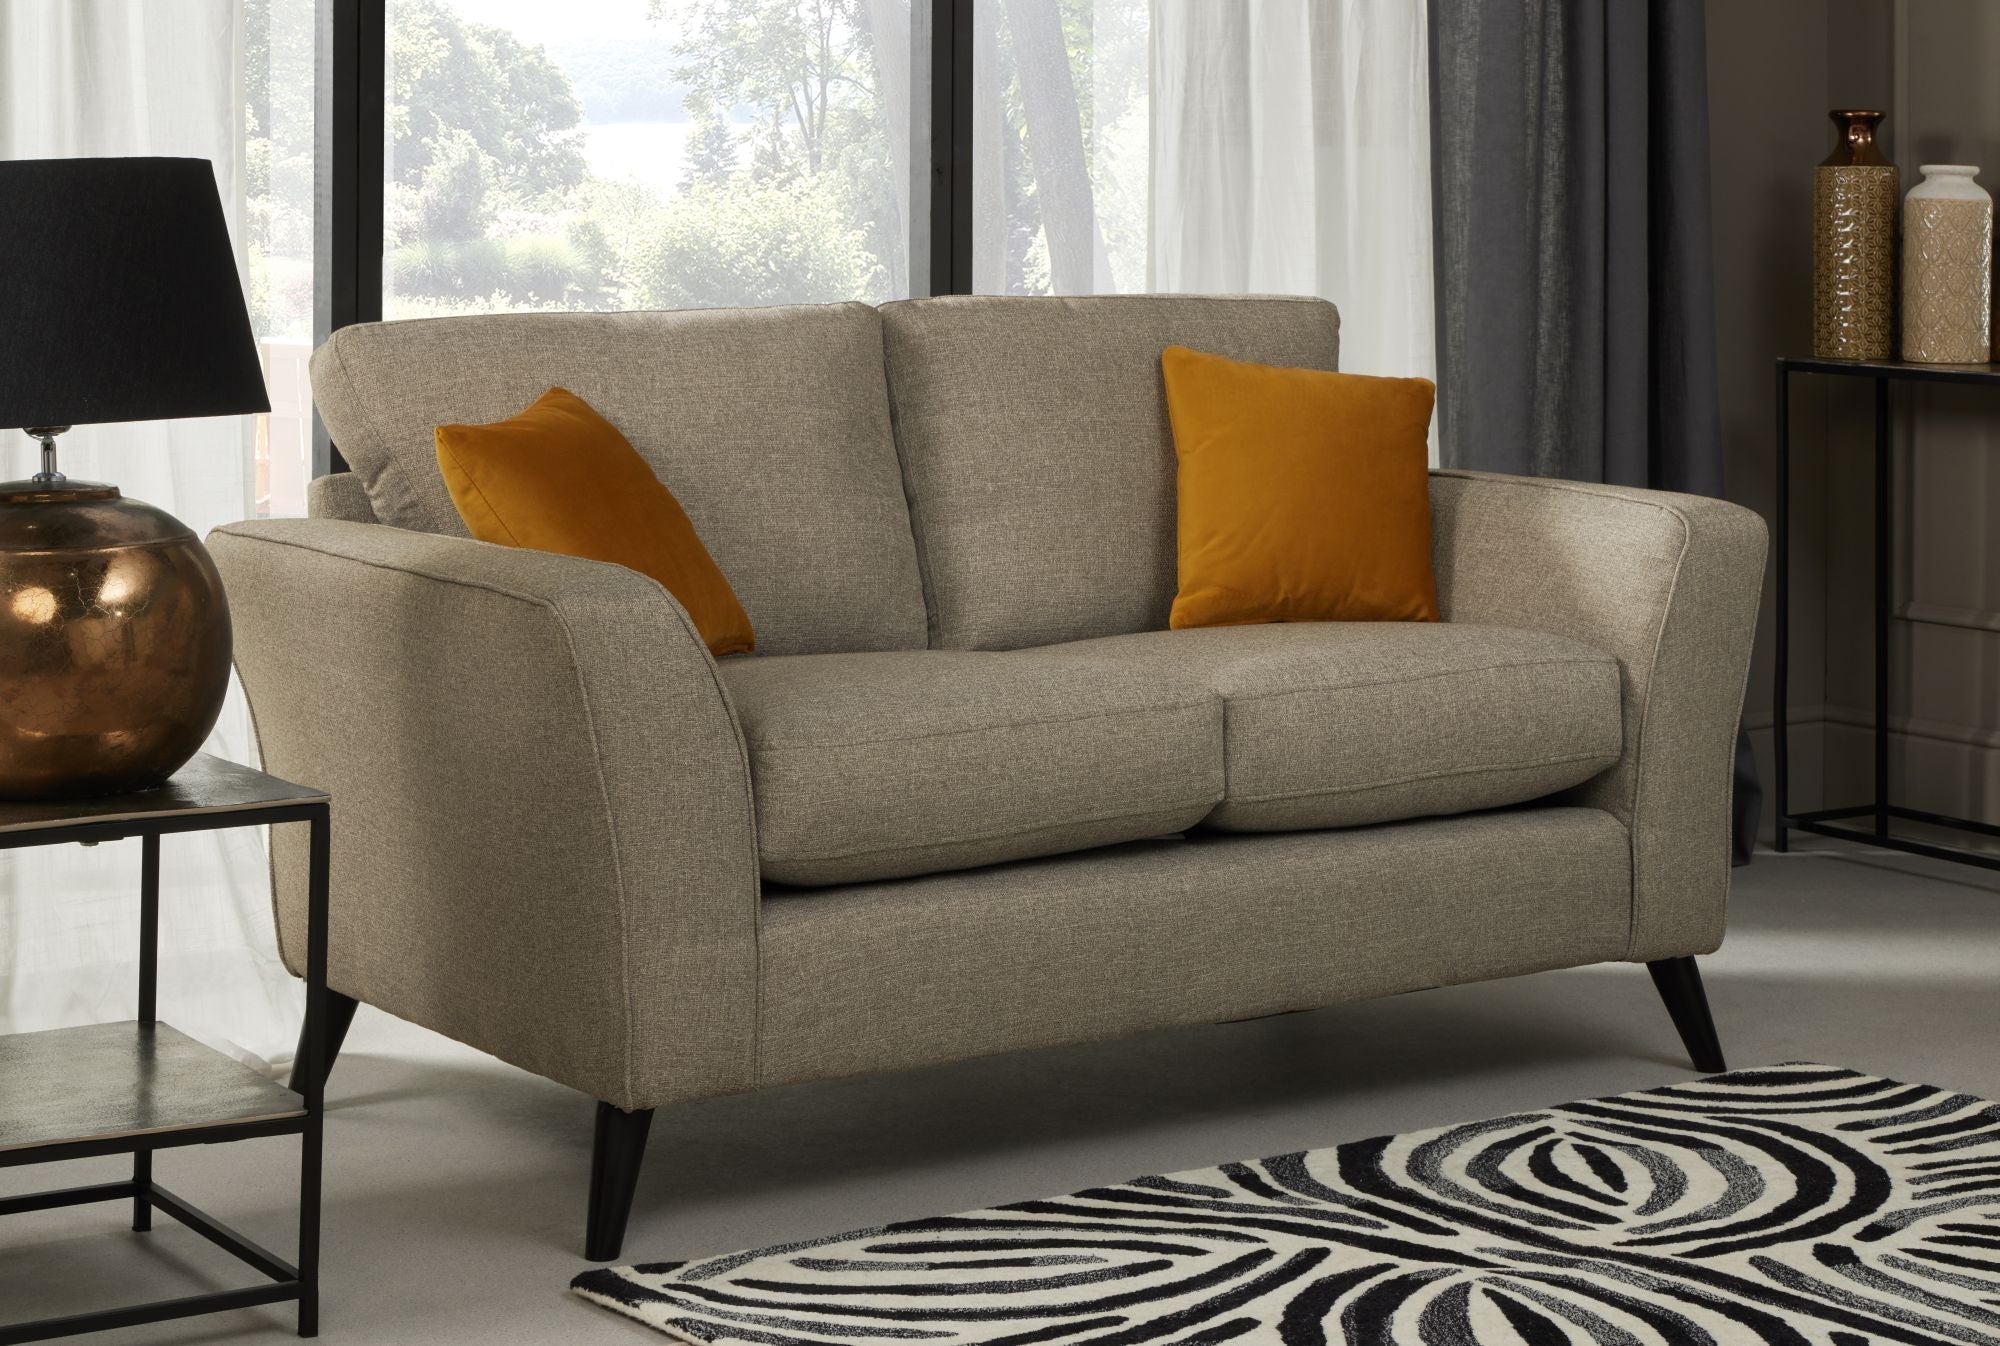 Libby 2 seater sofa in oatmeal show in a room setting